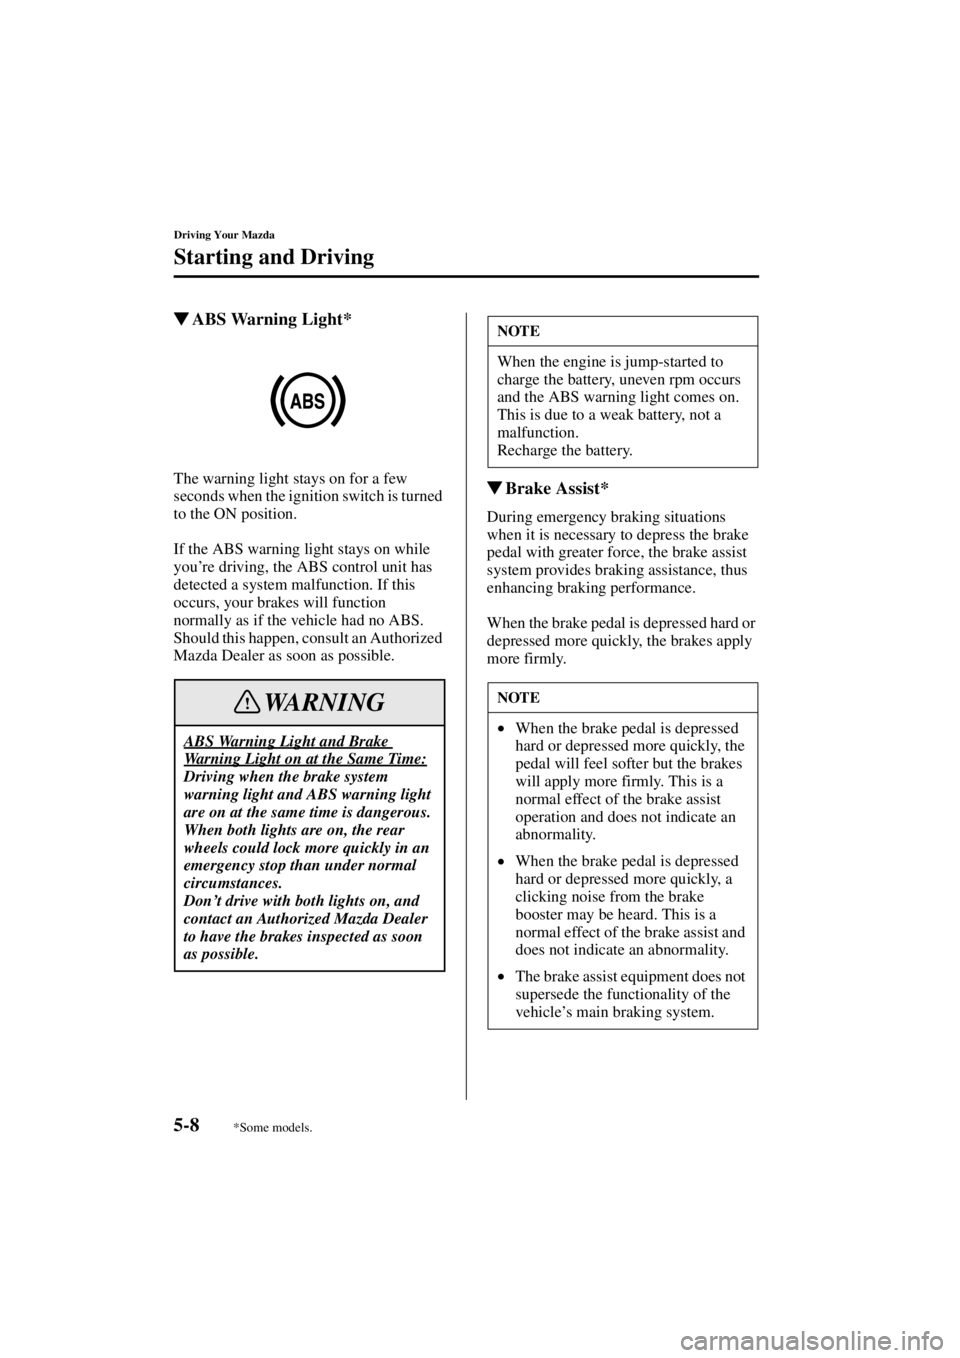 MAZDA MODEL 3 4-DOOR 2004  Owners Manual 5-8
Driving Your Mazda
Starting and Driving
Form No. 8S18-EA-03I
ABS Warning Light*
The warning light stays on for a few 
seconds when the ignition switch is turned 
to the ON position.
If the ABS wa